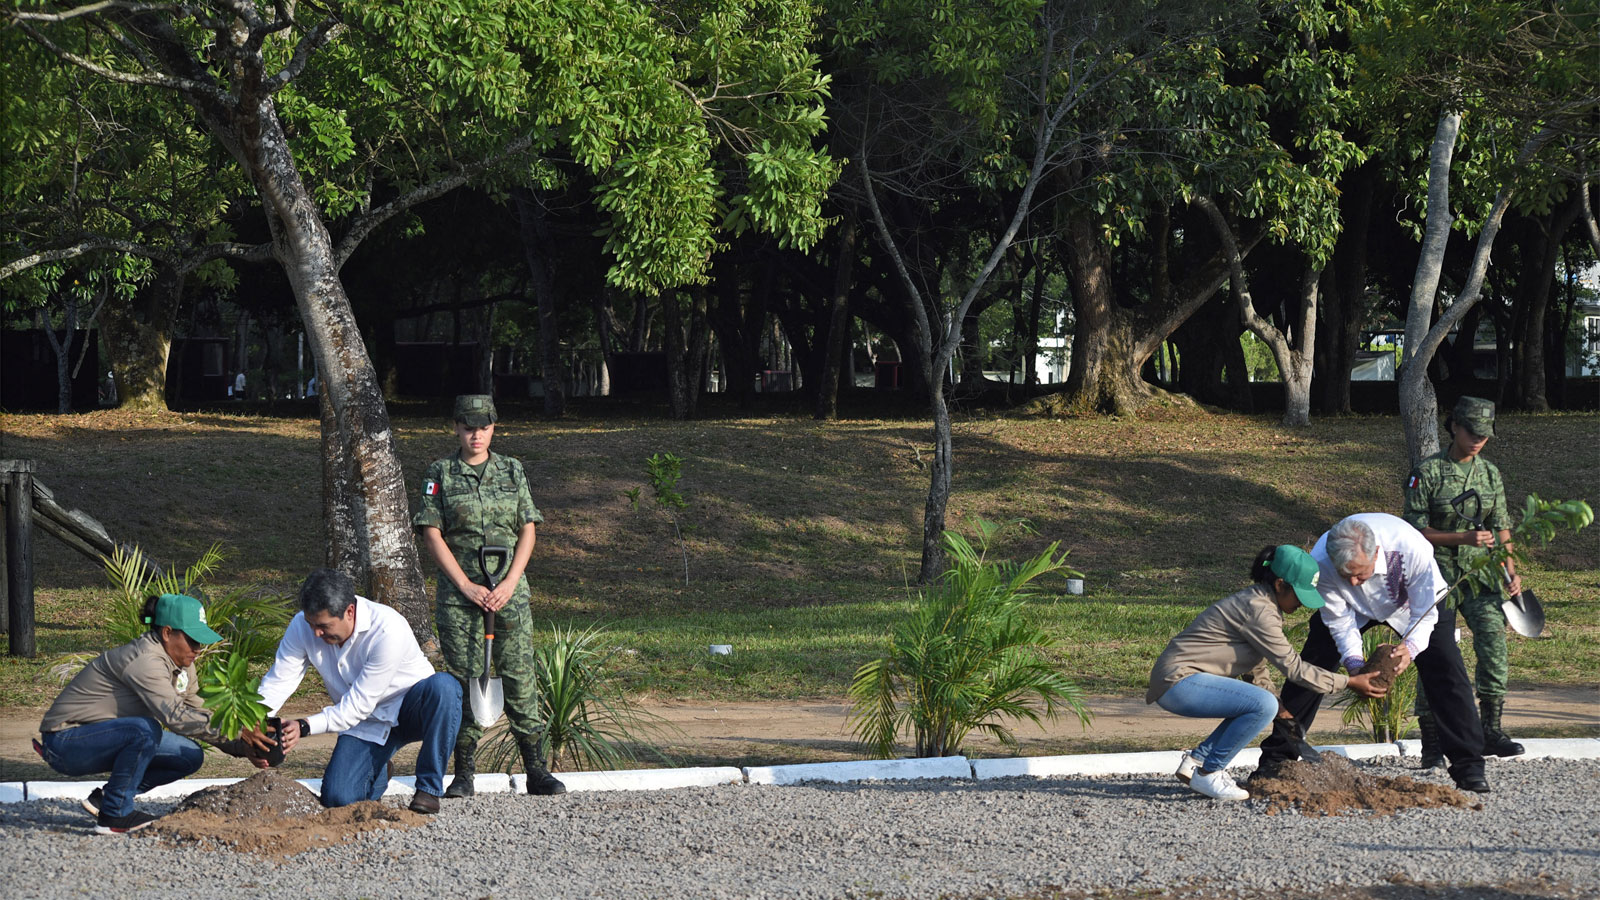 A group of six people, two in army fatigues, planting trees